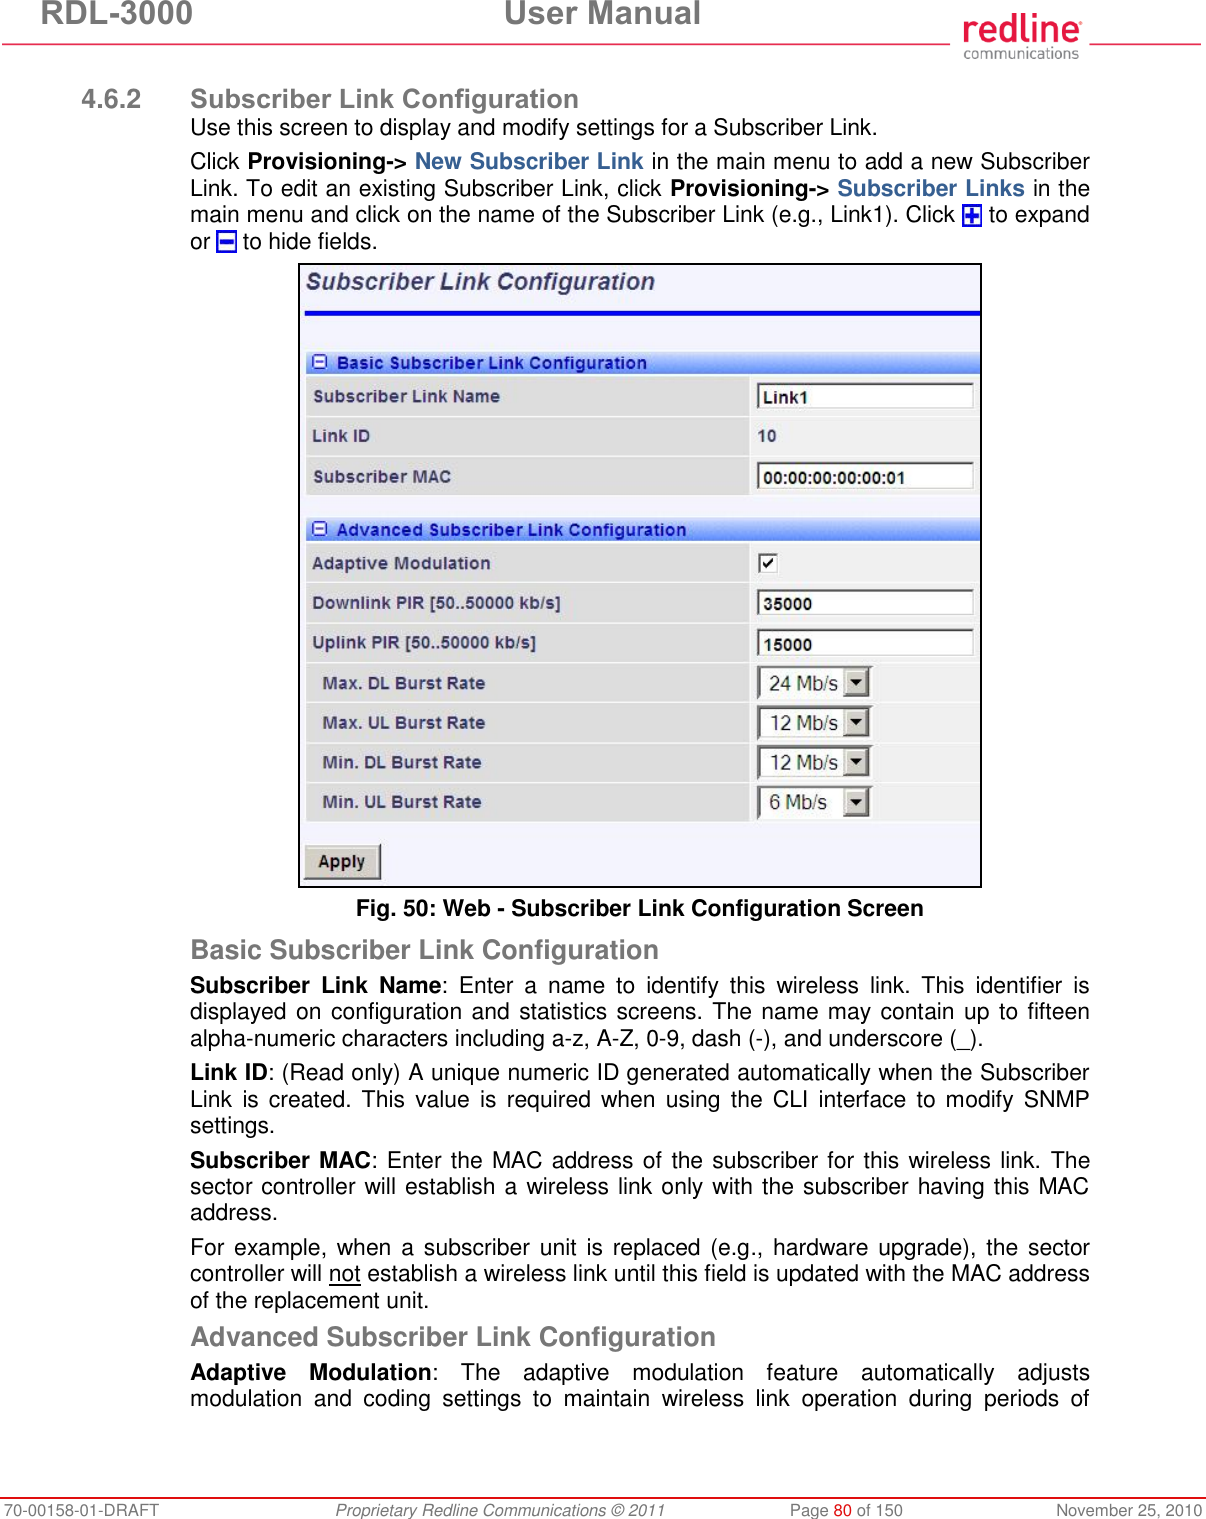 RDL-3000  User Manual 70-00158-01-DRAFT  Proprietary Redline Communications © 2011  Page 80 of 150  November 25, 2010  4.6.2 Subscriber Link Configuration Use this screen to display and modify settings for a Subscriber Link. Click Provisioning-&gt; New Subscriber Link in the main menu to add a new Subscriber Link. To edit an existing Subscriber Link, click Provisioning-&gt; Subscriber Links in the main menu and click on the name of the Subscriber Link (e.g., Link1). Click   to expand or   to hide fields.  Fig. 50: Web - Subscriber Link Configuration Screen Basic Subscriber Link Configuration Subscriber  Link  Name:  Enter  a  name  to  identify  this  wireless  link.  This  identifier  is displayed on configuration and statistics screens. The name may contain up to fifteen alpha-numeric characters including a-z, A-Z, 0-9, dash (-), and underscore (_). Link ID: (Read only) A unique numeric ID generated automatically when the Subscriber Link  is created. This  value is  required when  using  the  CLI  interface  to  modify  SNMP settings. Subscriber MAC: Enter the MAC address of the subscriber for this wireless link. The sector controller will establish a wireless link only with the subscriber having this MAC address. For example, when a subscriber unit is replaced (e.g.,  hardware upgrade), the  sector controller will not establish a wireless link until this field is updated with the MAC address of the replacement unit. Advanced Subscriber Link Configuration Adaptive  Modulation:  The  adaptive  modulation  feature  automatically  adjusts modulation  and  coding  settings  to  maintain  wireless  link  operation  during  periods  of 